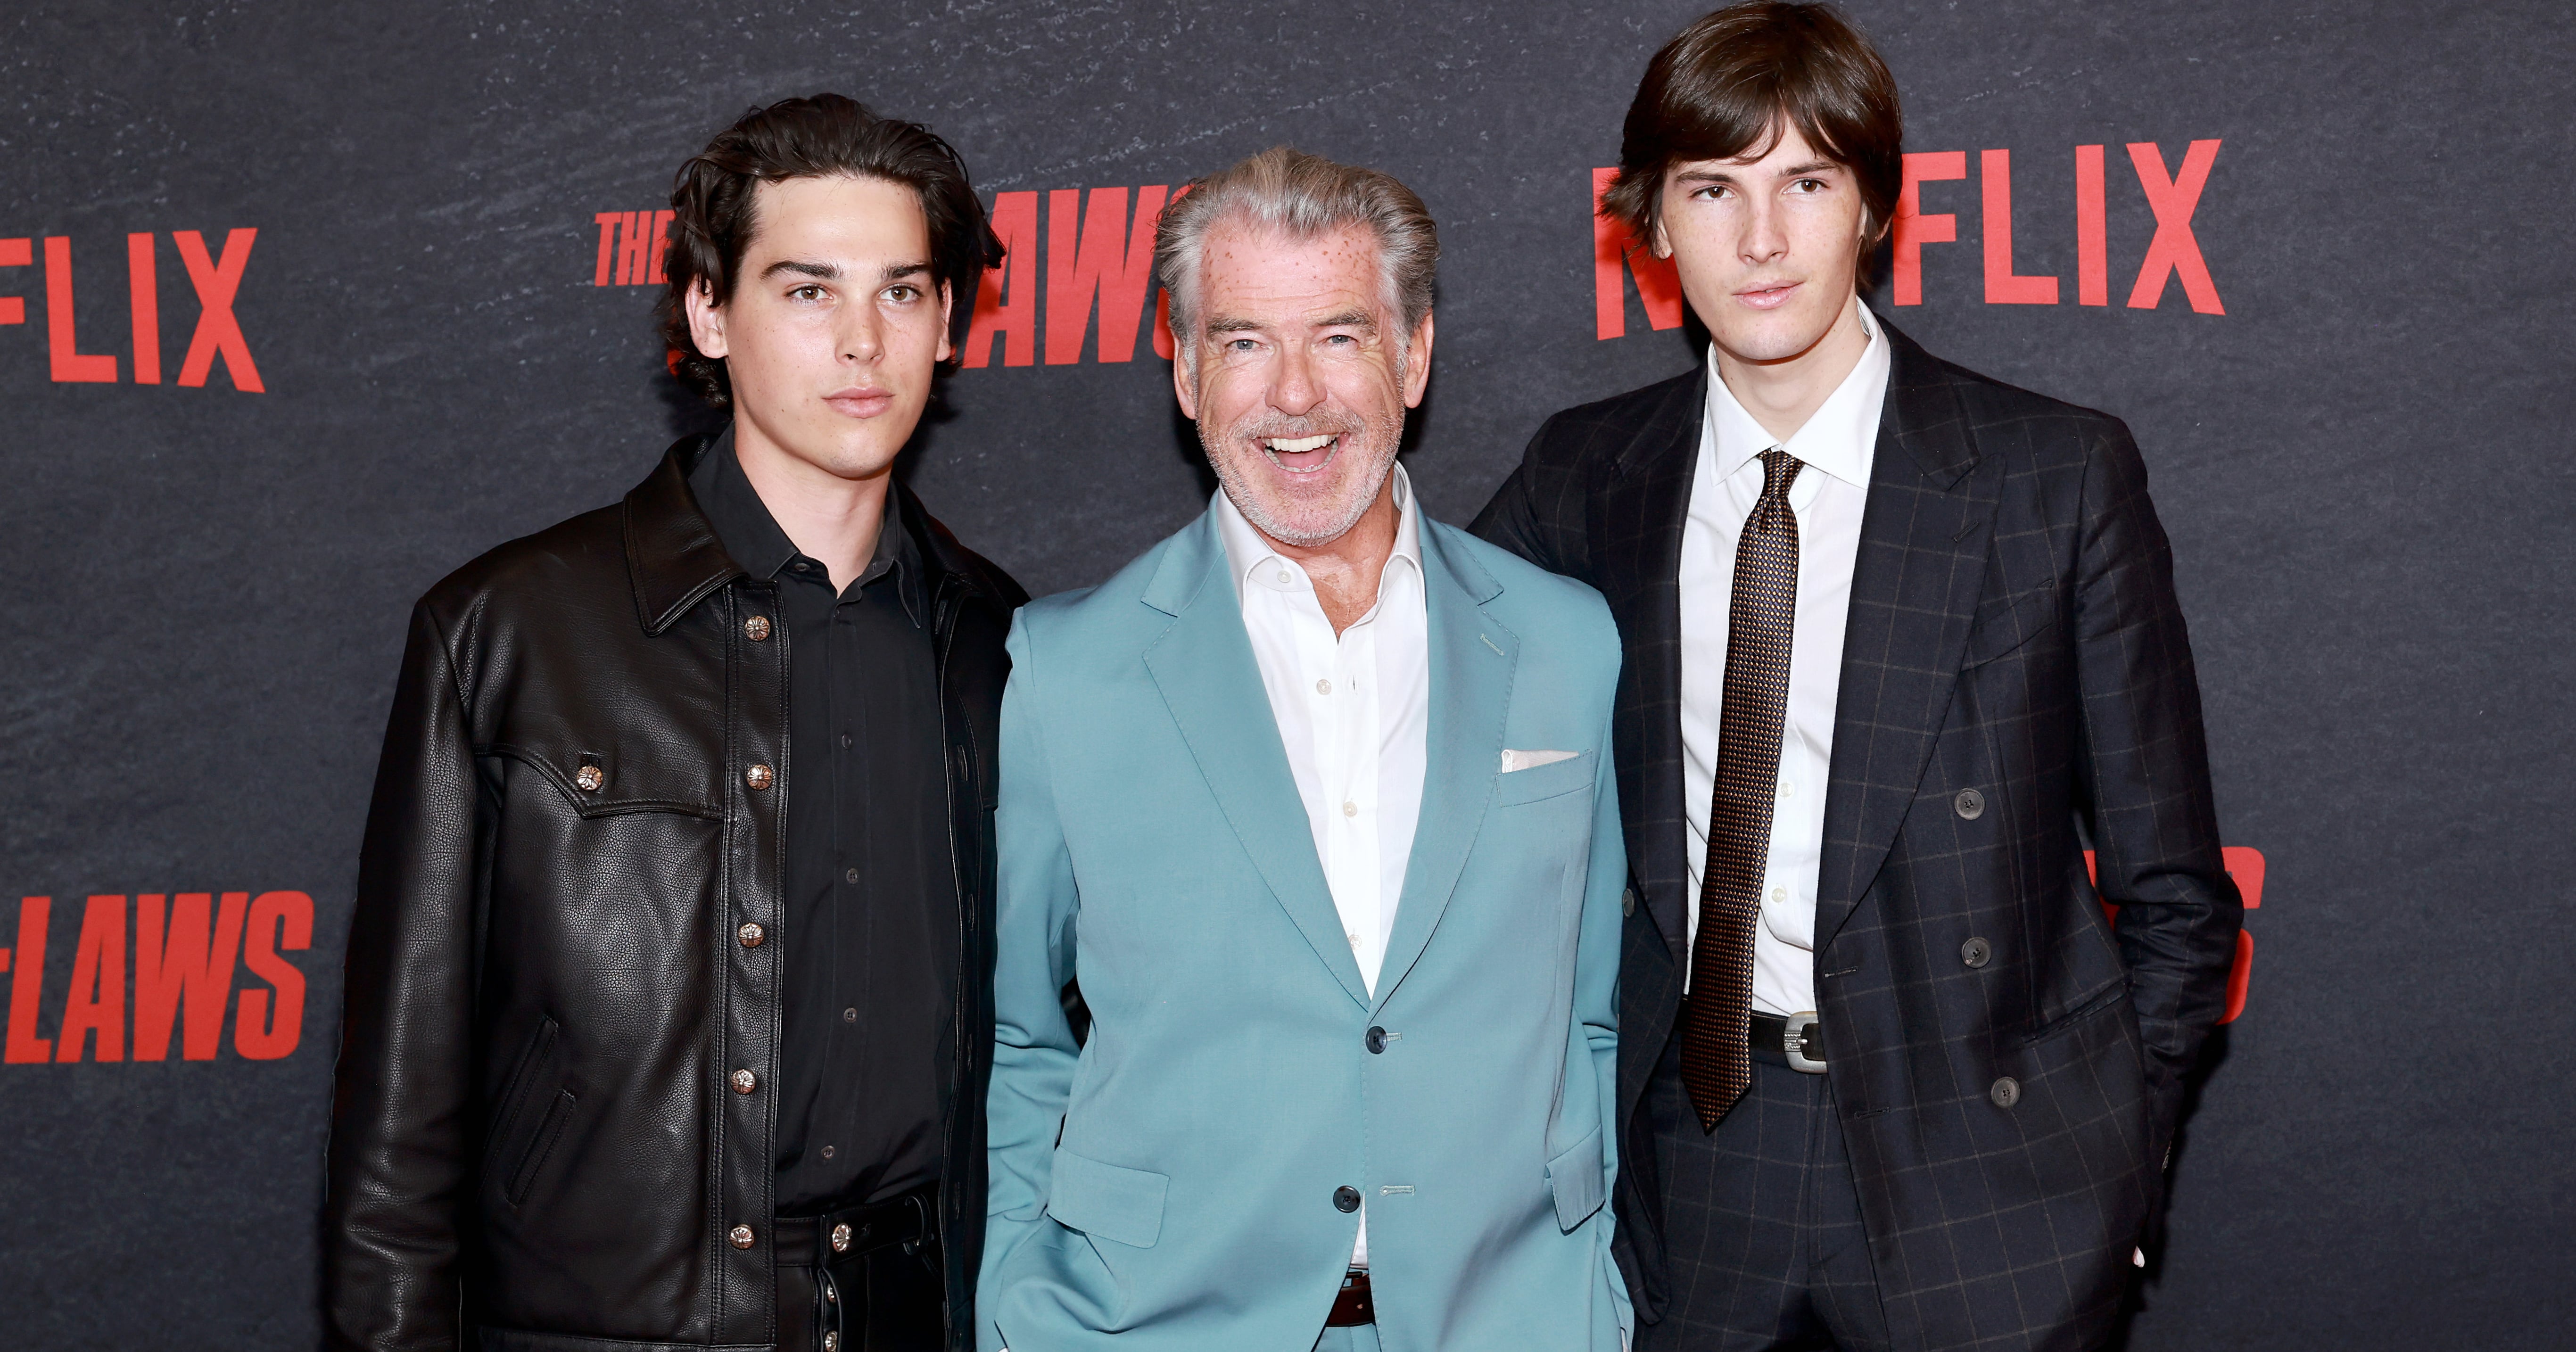 How Many Kids Does Pierce Brosnan Have?